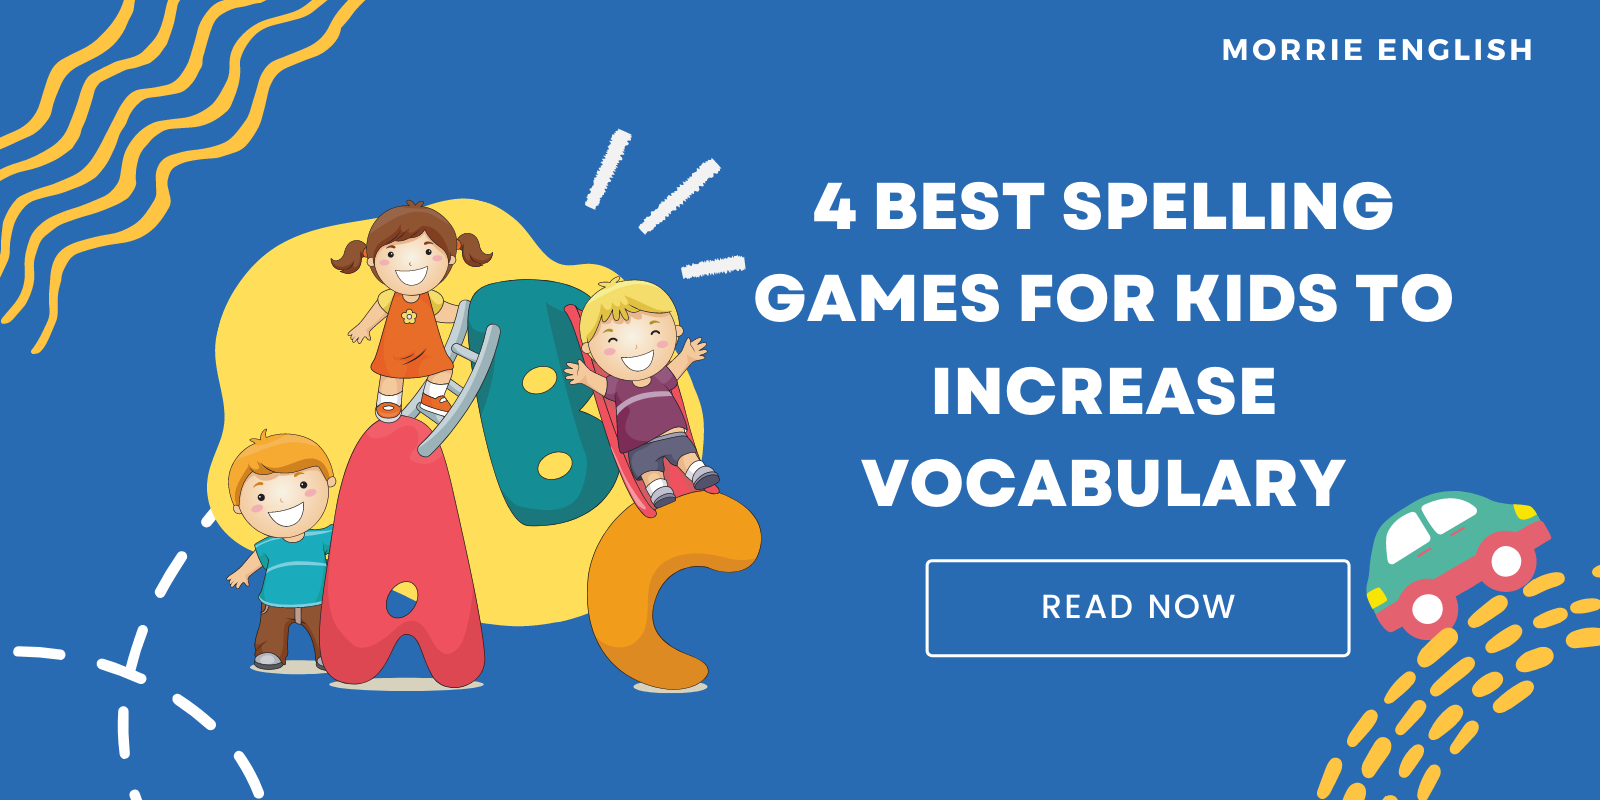 4-best-spelling-games-for-kids-to-increase-vocabulary